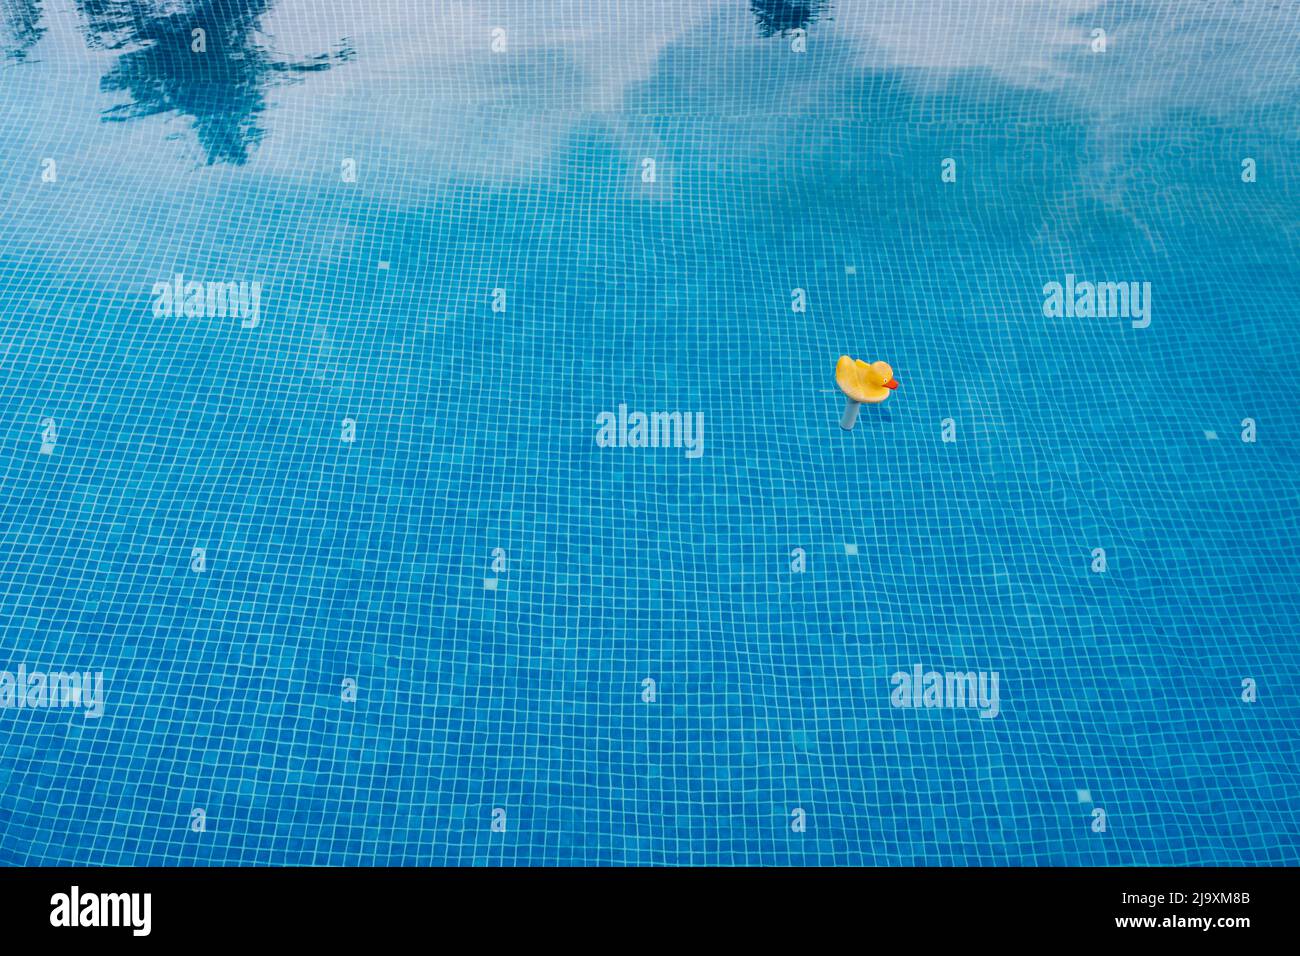 background calm water of blue summer swimming pool. yellow rubber duck toy in the water. text to be used. Stock Photo